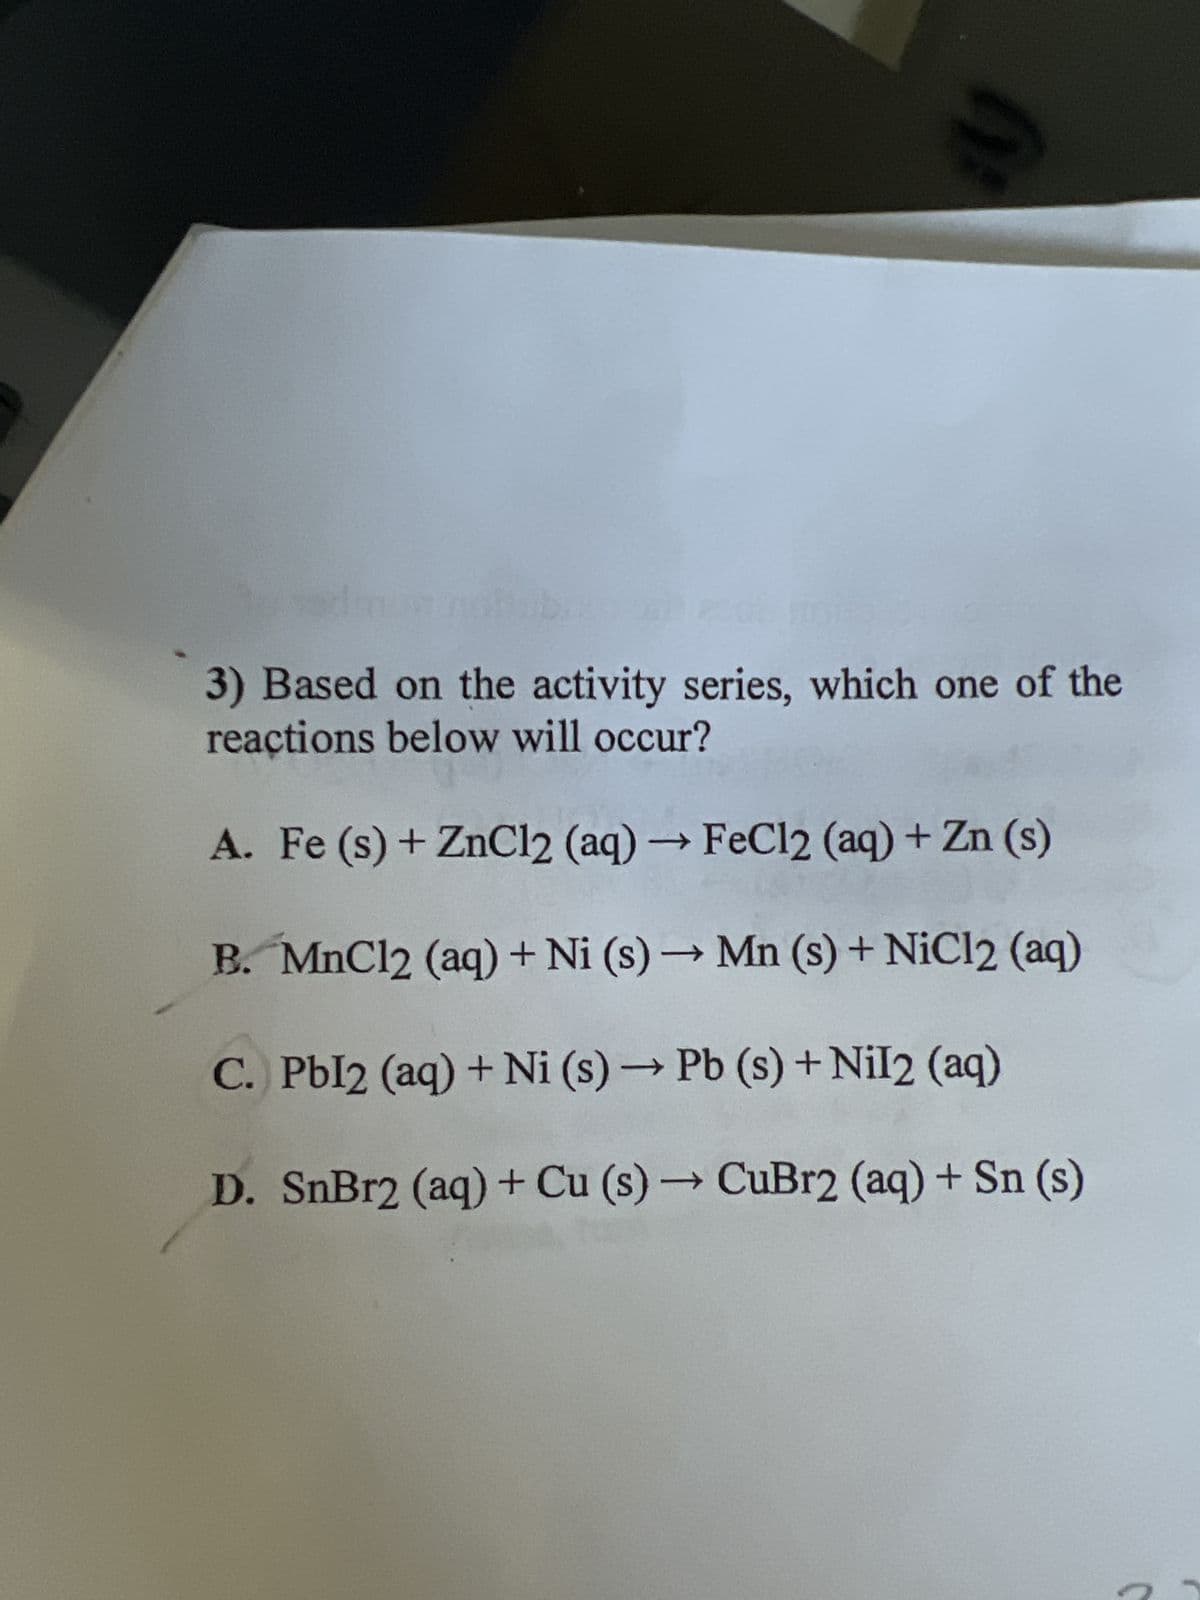 y
3) Based on the activity series, which one of the
reactions below will occur?
A. Fe (s) + ZnCl2 (aq) → FeCl2 (aq) + Zn (s)
B. MnCl2 (aq) + Ni (s) → Mn (s) + NiCl2 (aq)
C. Pbl2 (aq) + Ni (s) → Pb (s) + Nil2 (aq)
D. SnBr2 (aq) + Cu (s) → CuBr2 (aq) + Sn (s)